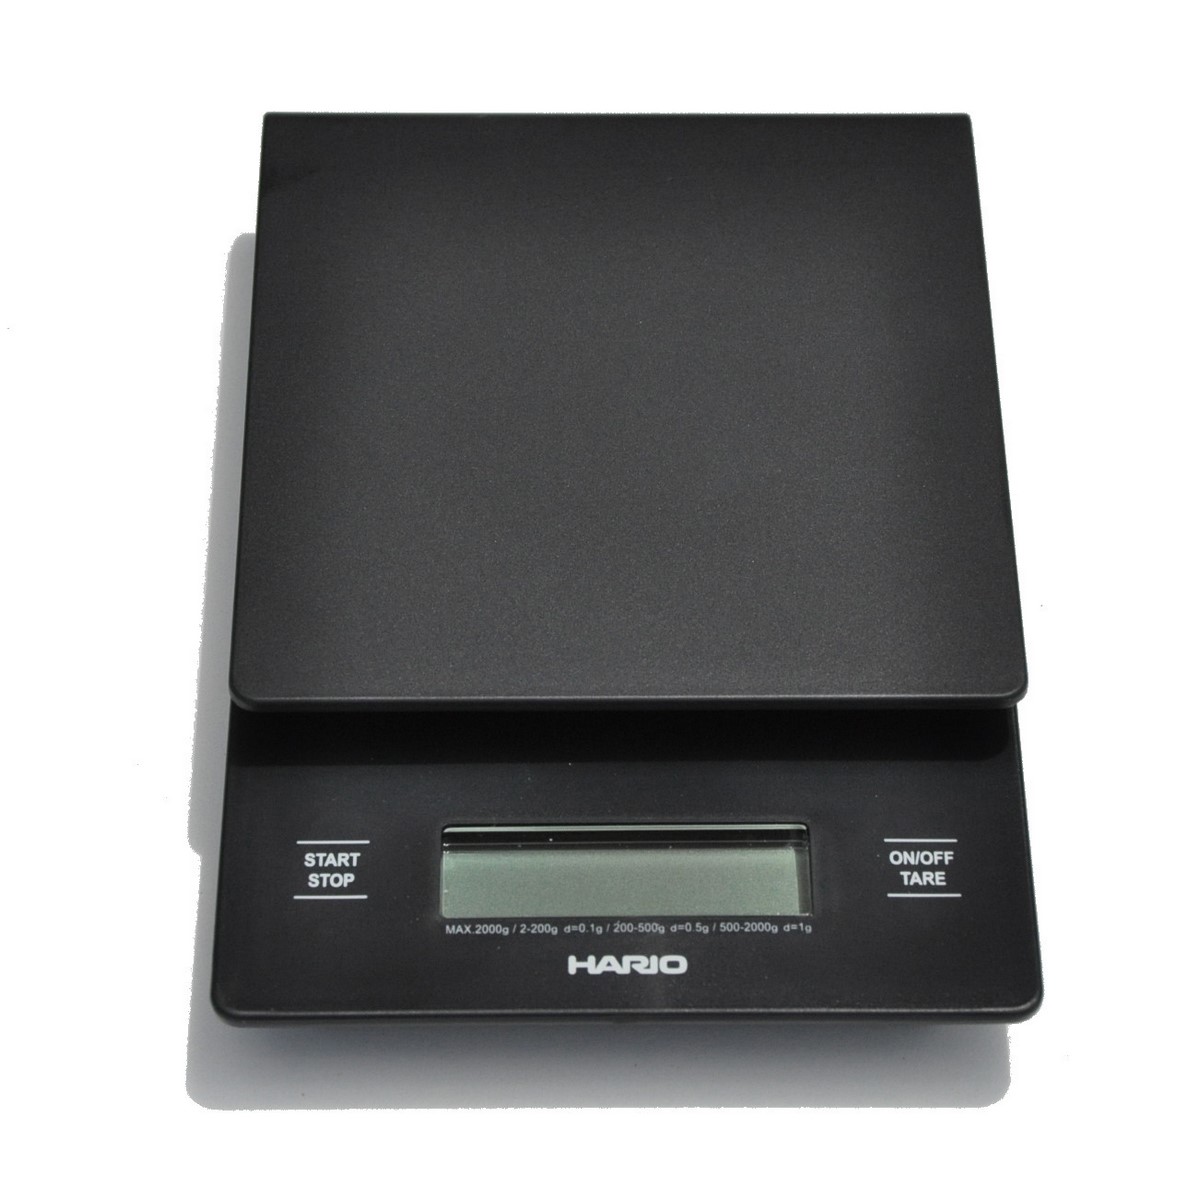 Acquista online Hario V60 Drip Scale and Timer 